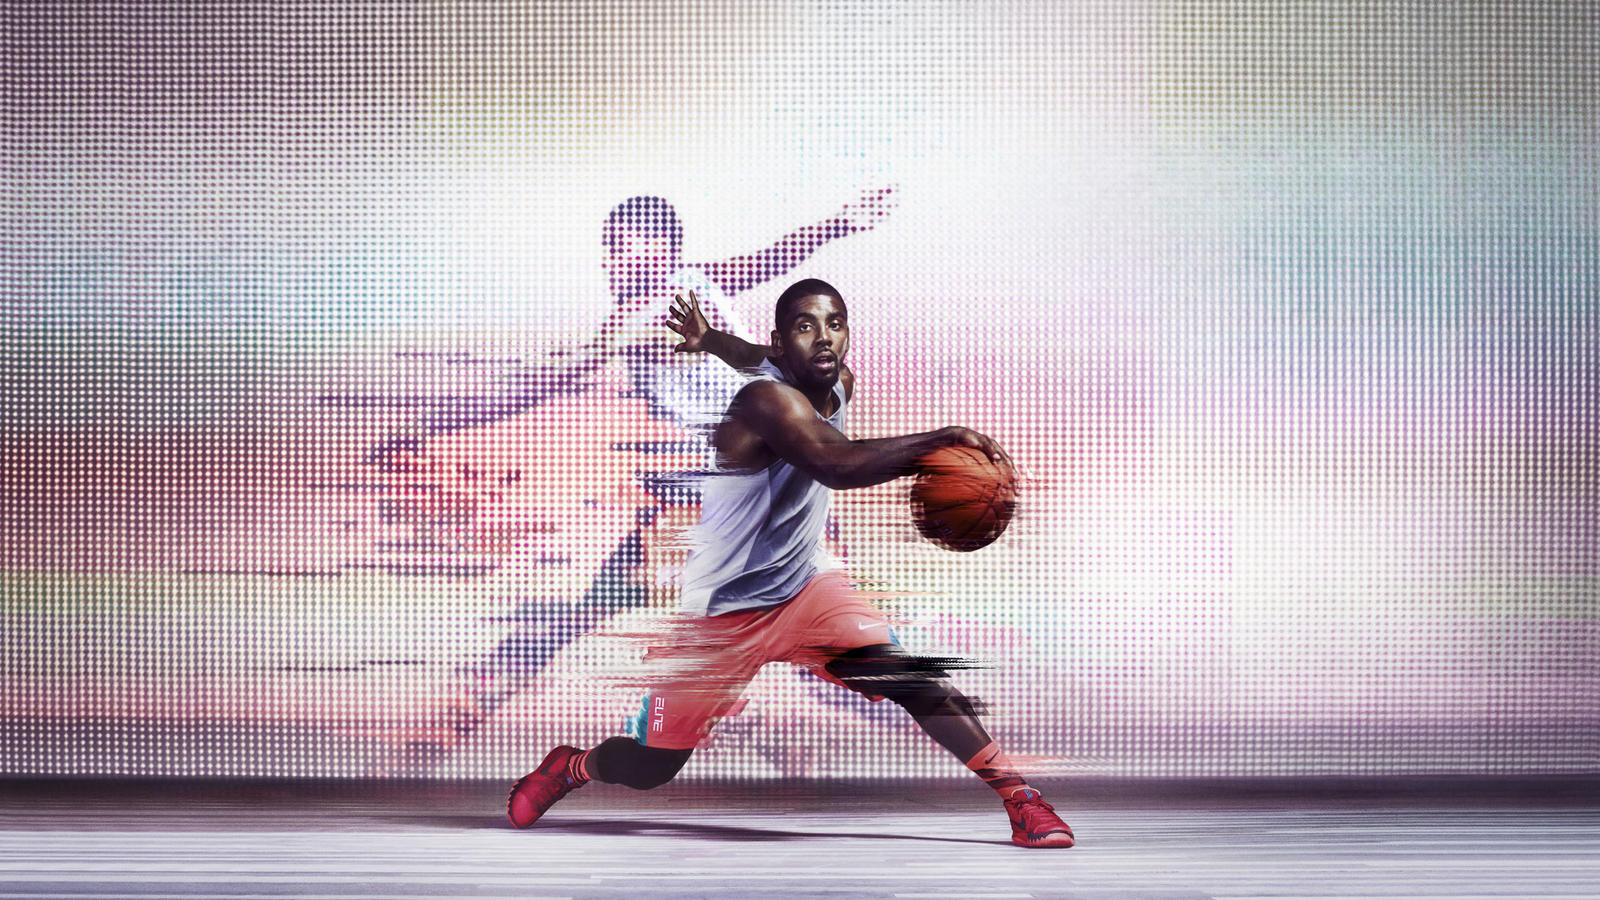 Nike Welcomes Kyrie Irving to its Esteemed Signature Athlete